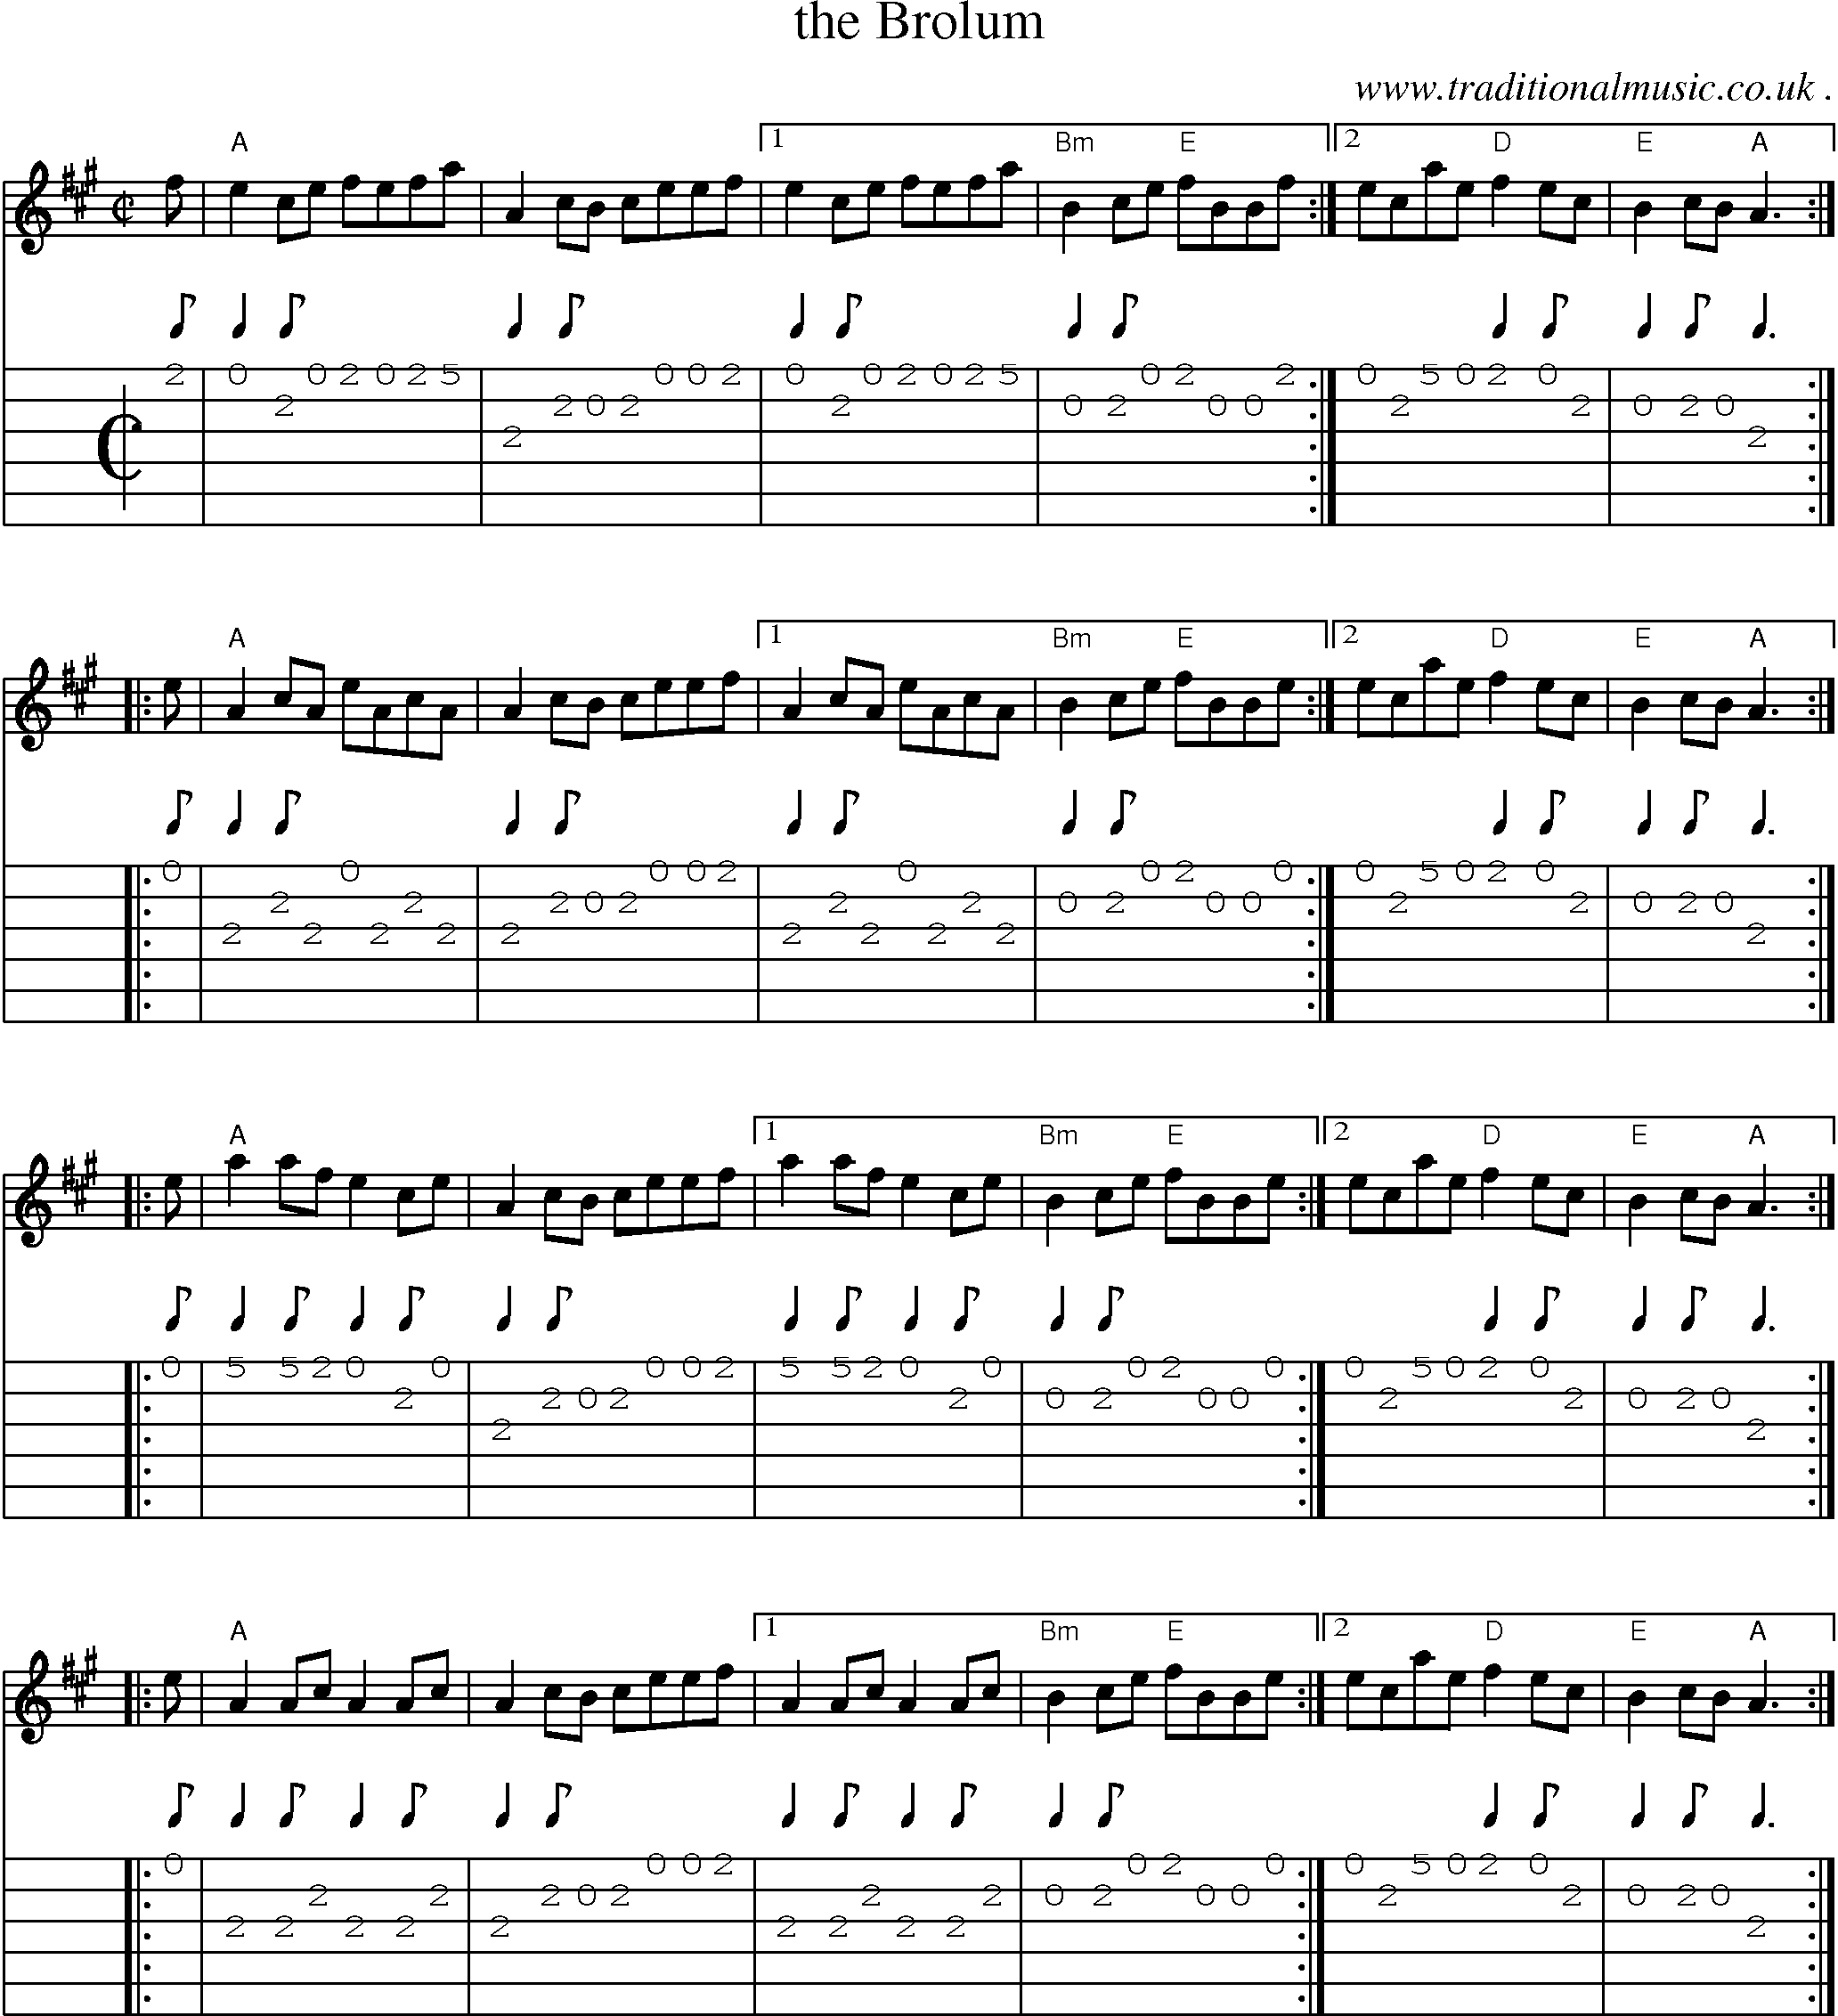 Sheet-music  score, Chords and Guitar Tabs for The Brolum